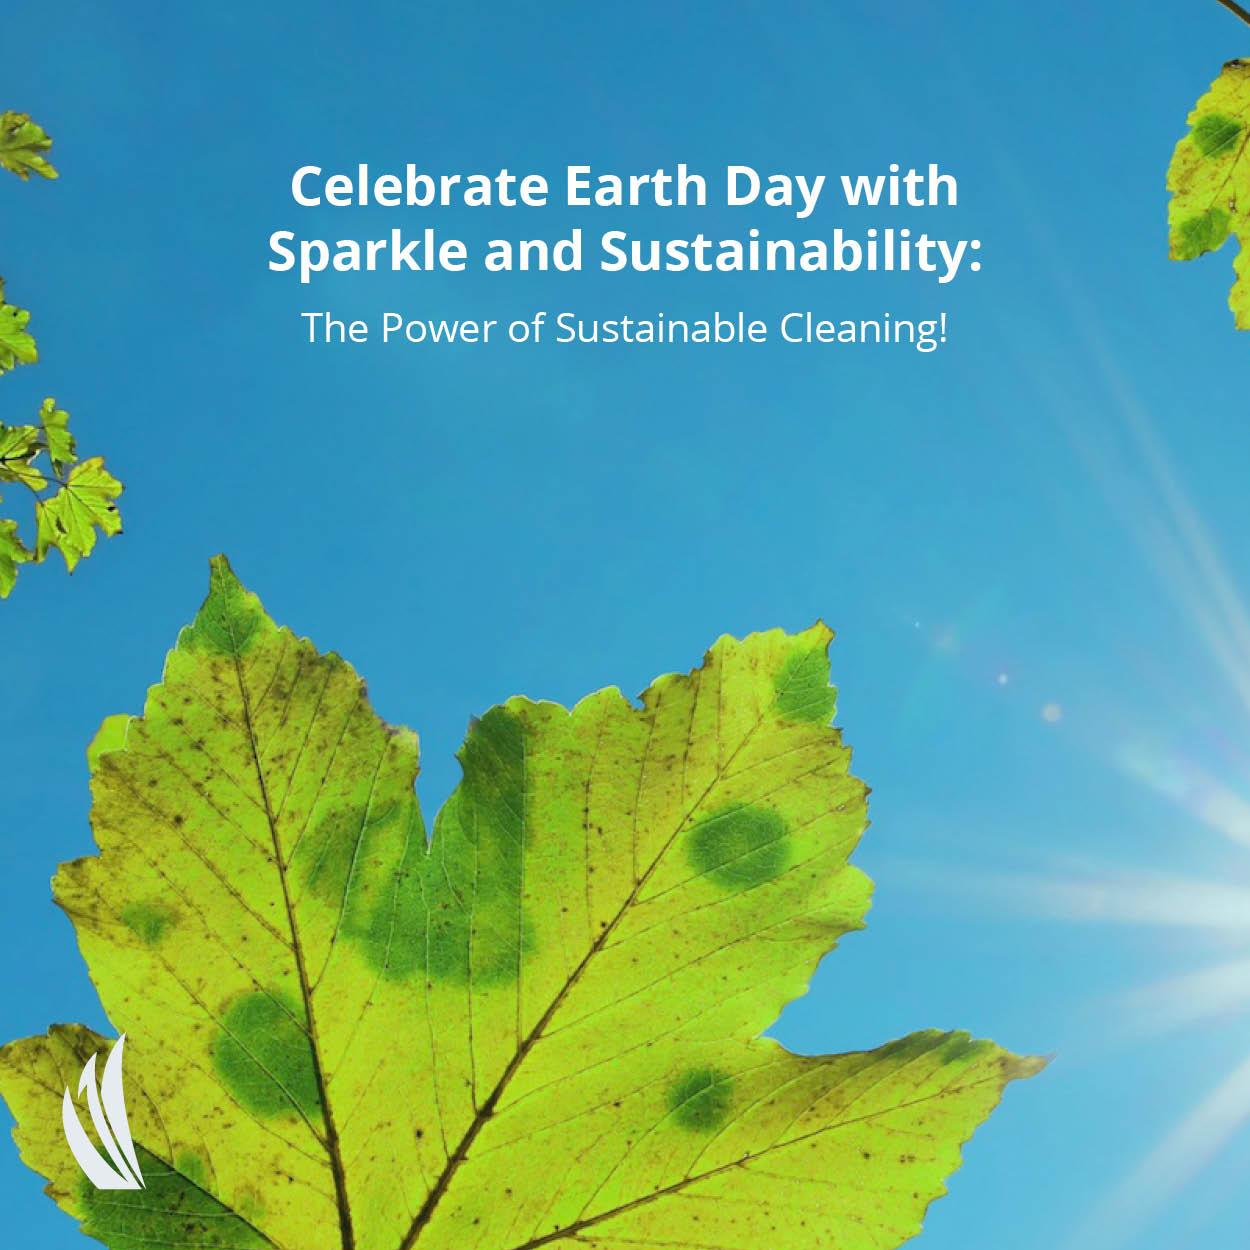 Celebrate Earth Day with Sparkle and Sustainability: The Power of Sustainable Cleaning!